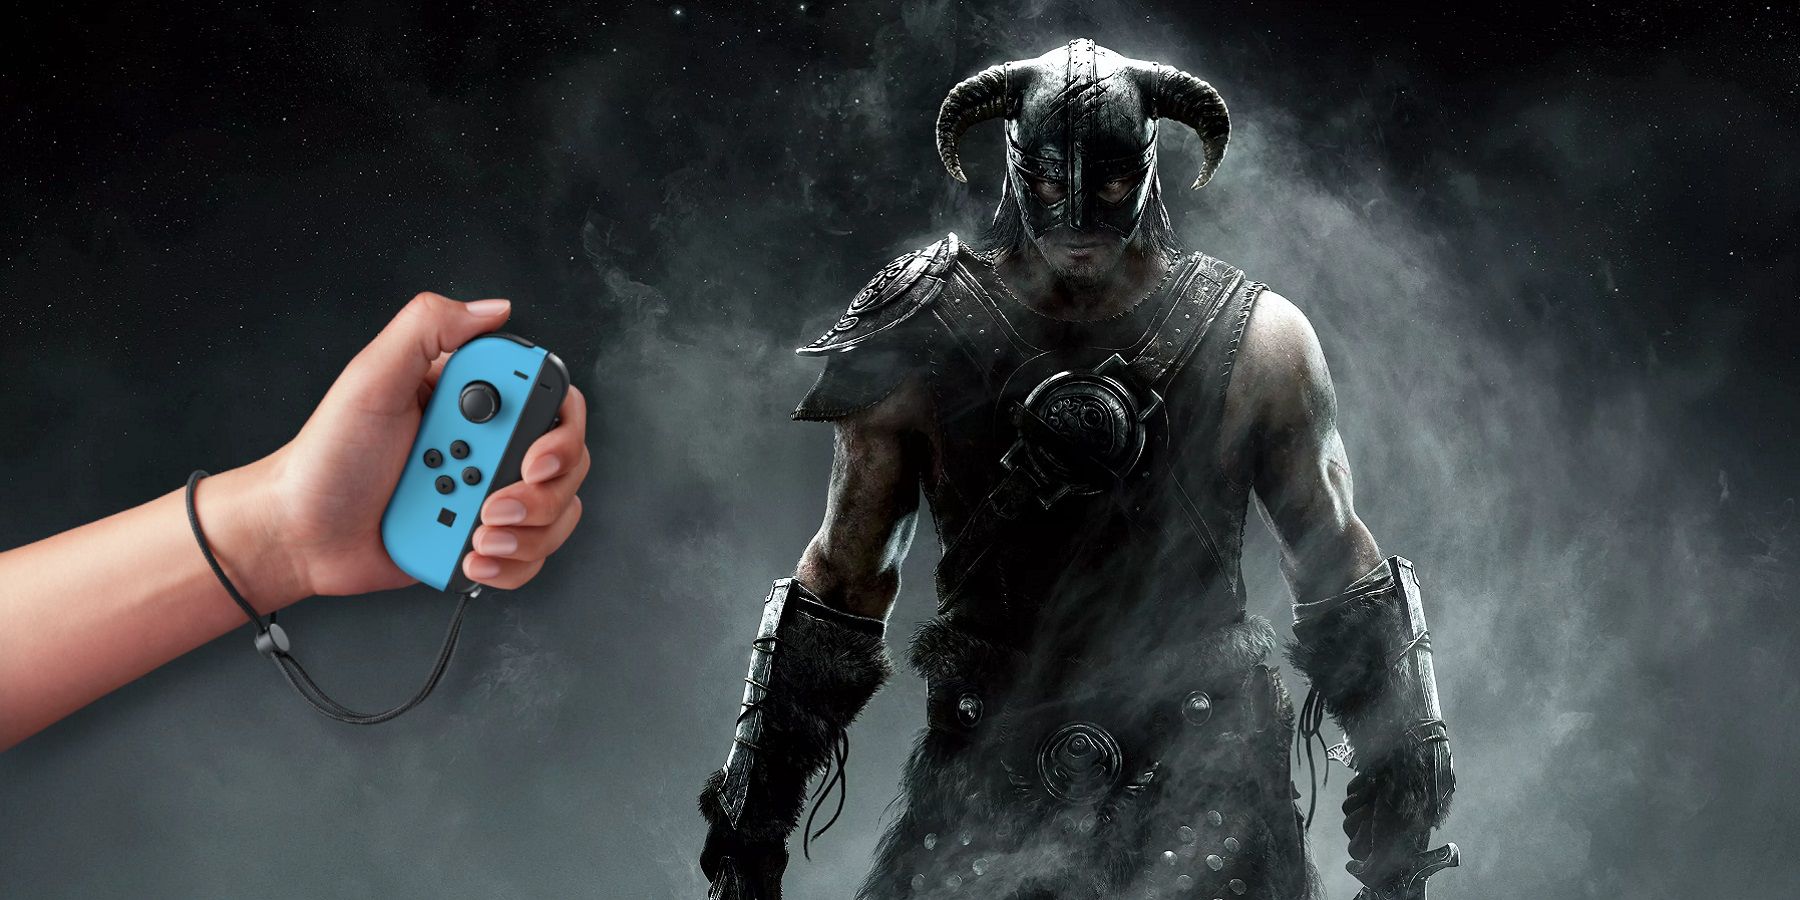 Leaked Screenshot Suggests Skyrim Anniversary Edition Is Coming to Switch